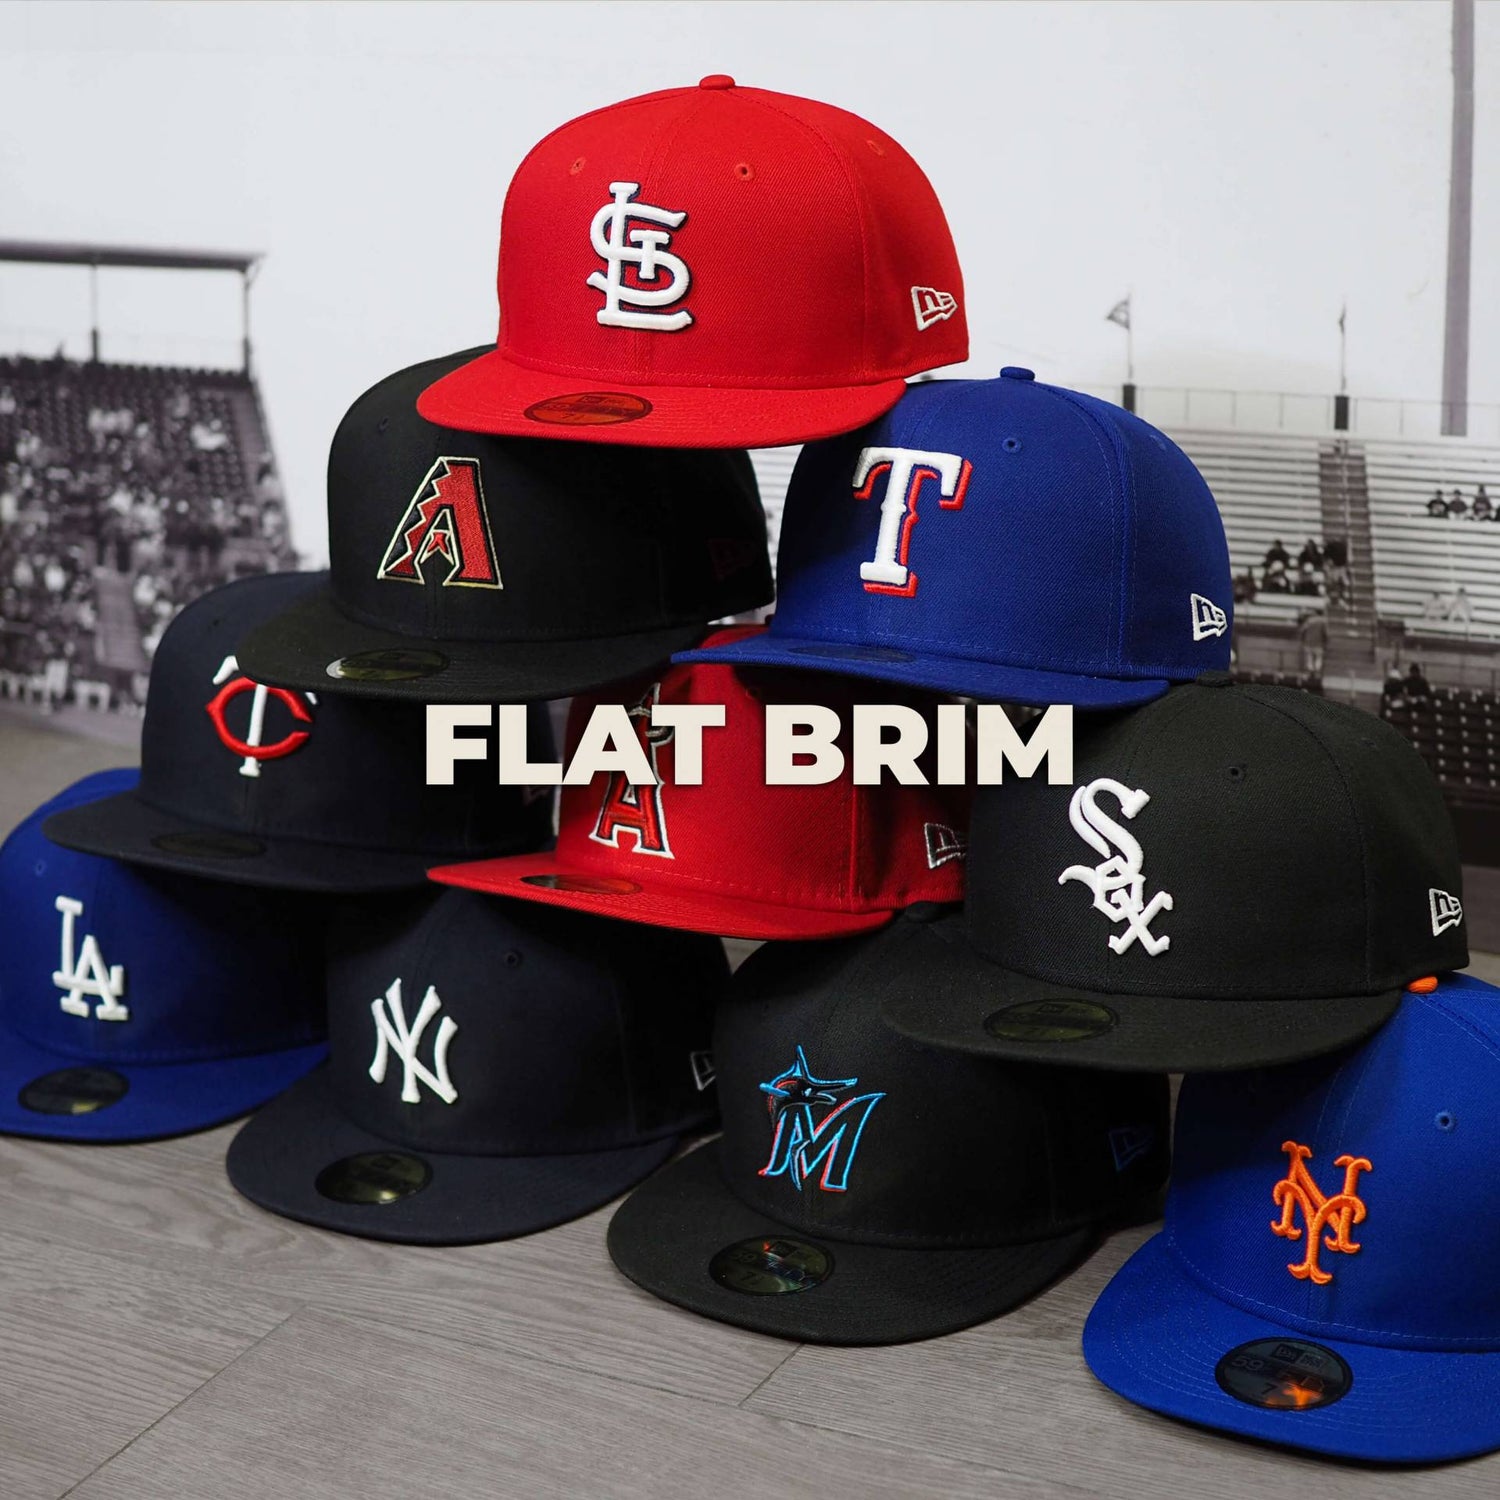 Buy New Era 59fifty Products Online at Best Prices